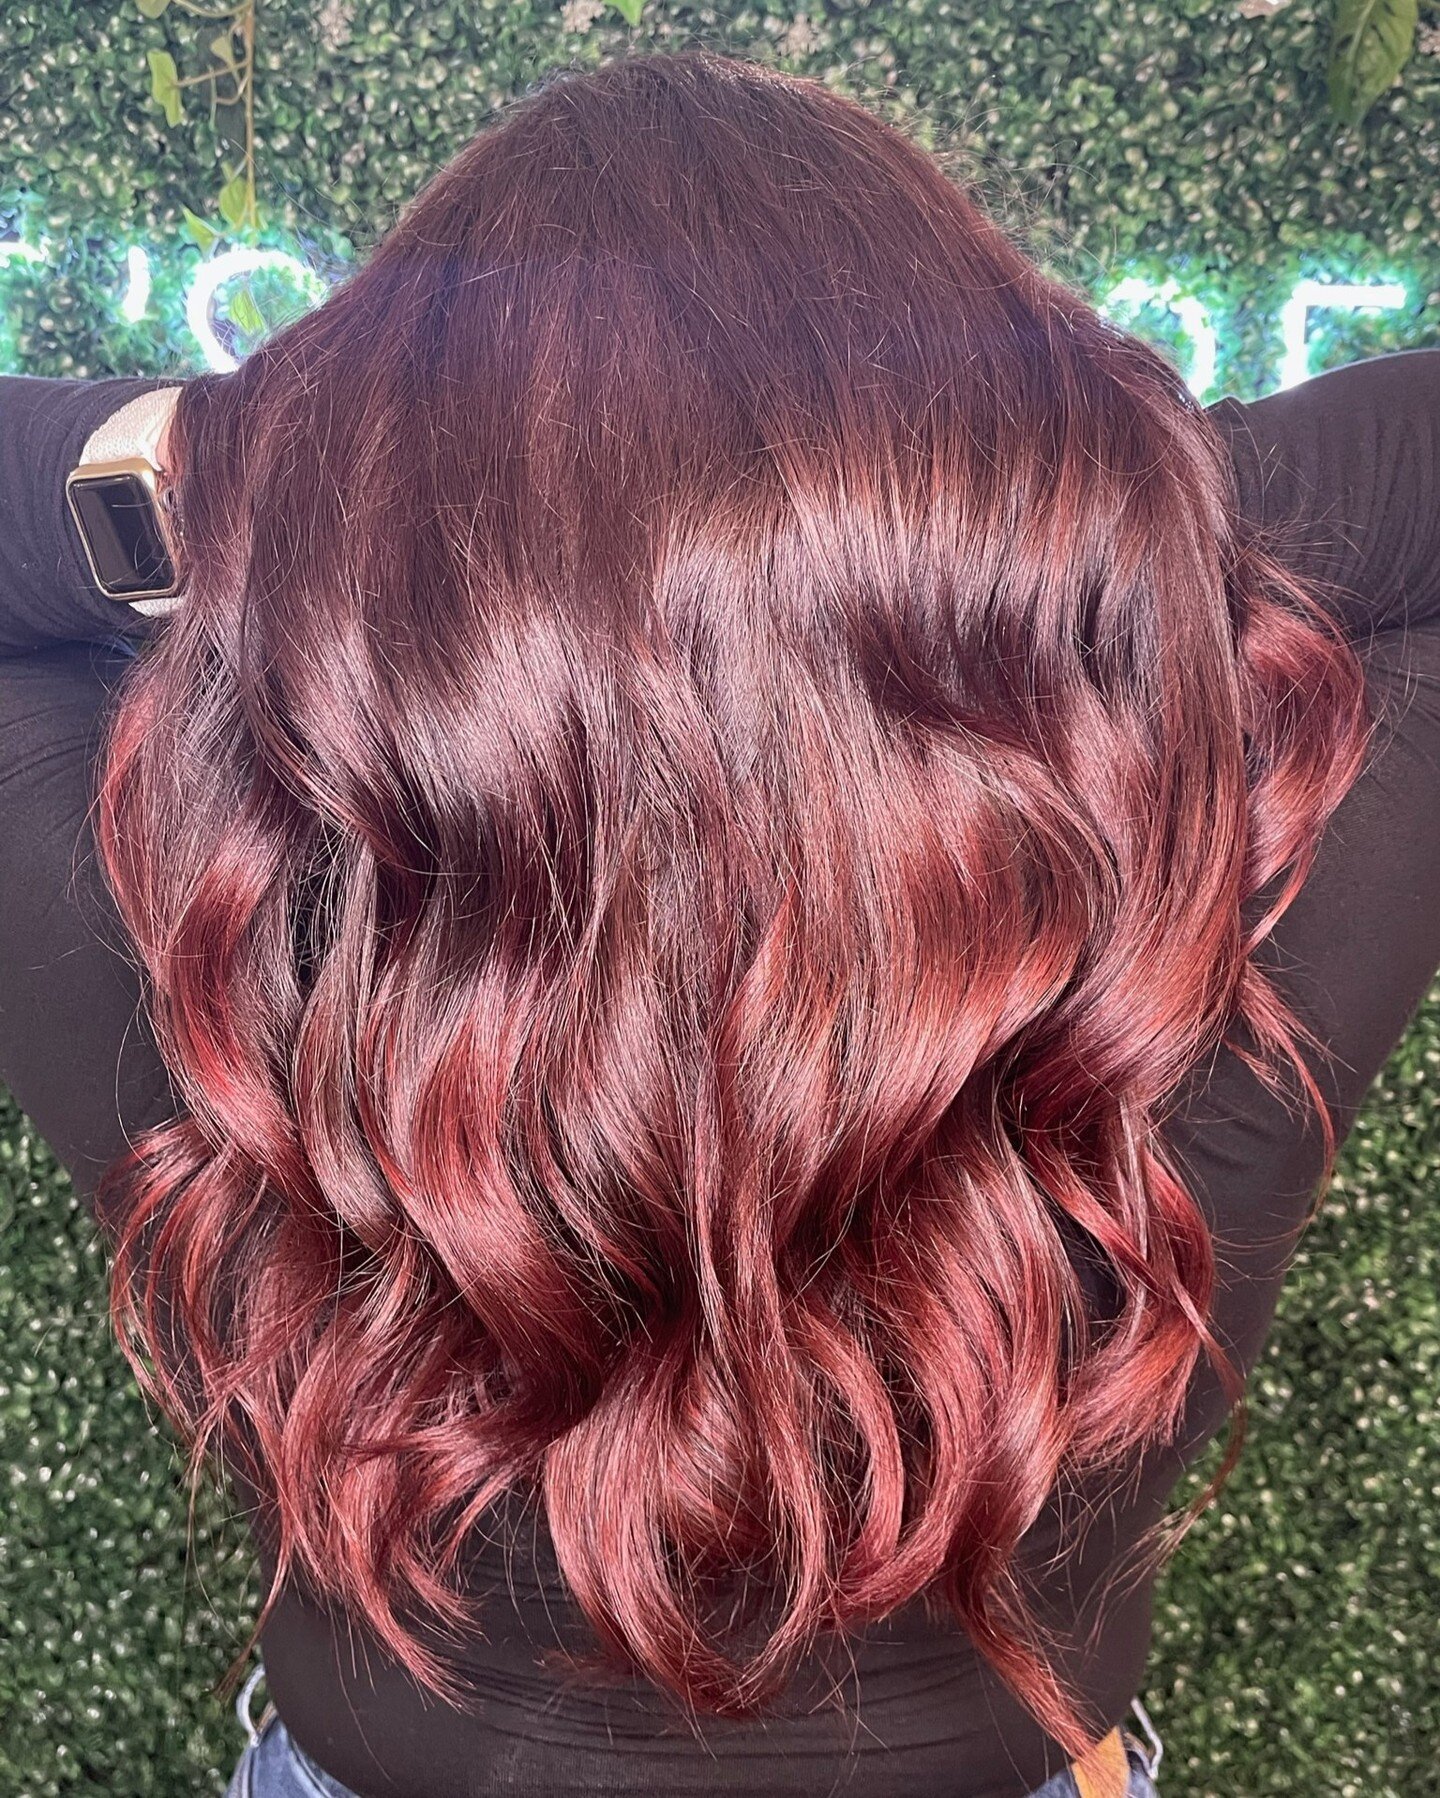 A throwback to this stunning deep red hair transformation! This is the perfect fall vibe that still gives us all the cozy feels! 🍂

Major kudos to @morganbiroc.hair for the incredible cut, color, and style! Swipe to see the before. 

Ready to book y